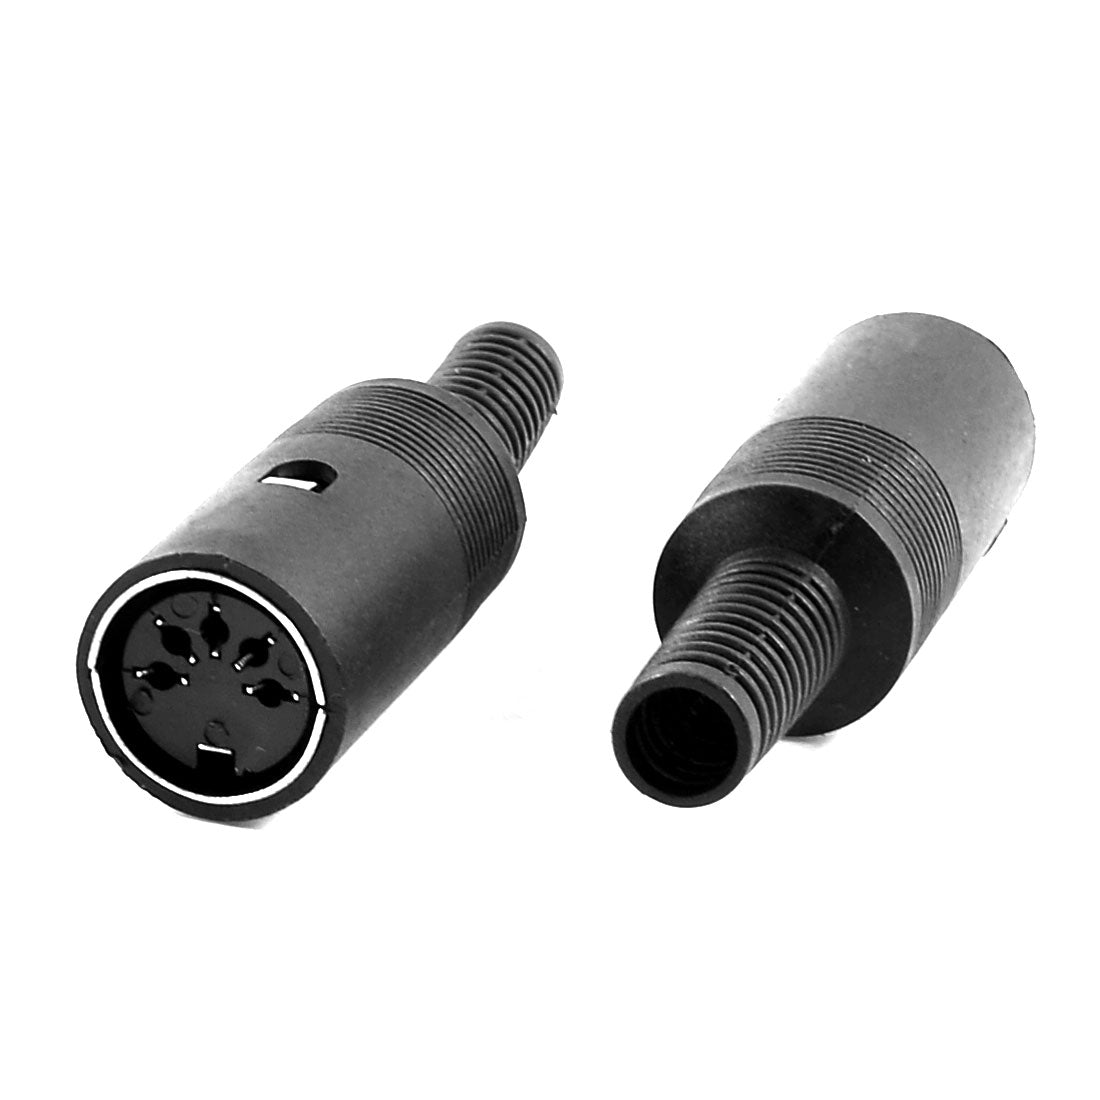 uxcell Uxcell 6cm Long Black Plastic DIN 5 Pin Female In-Line Audio Socket 2 Pcs